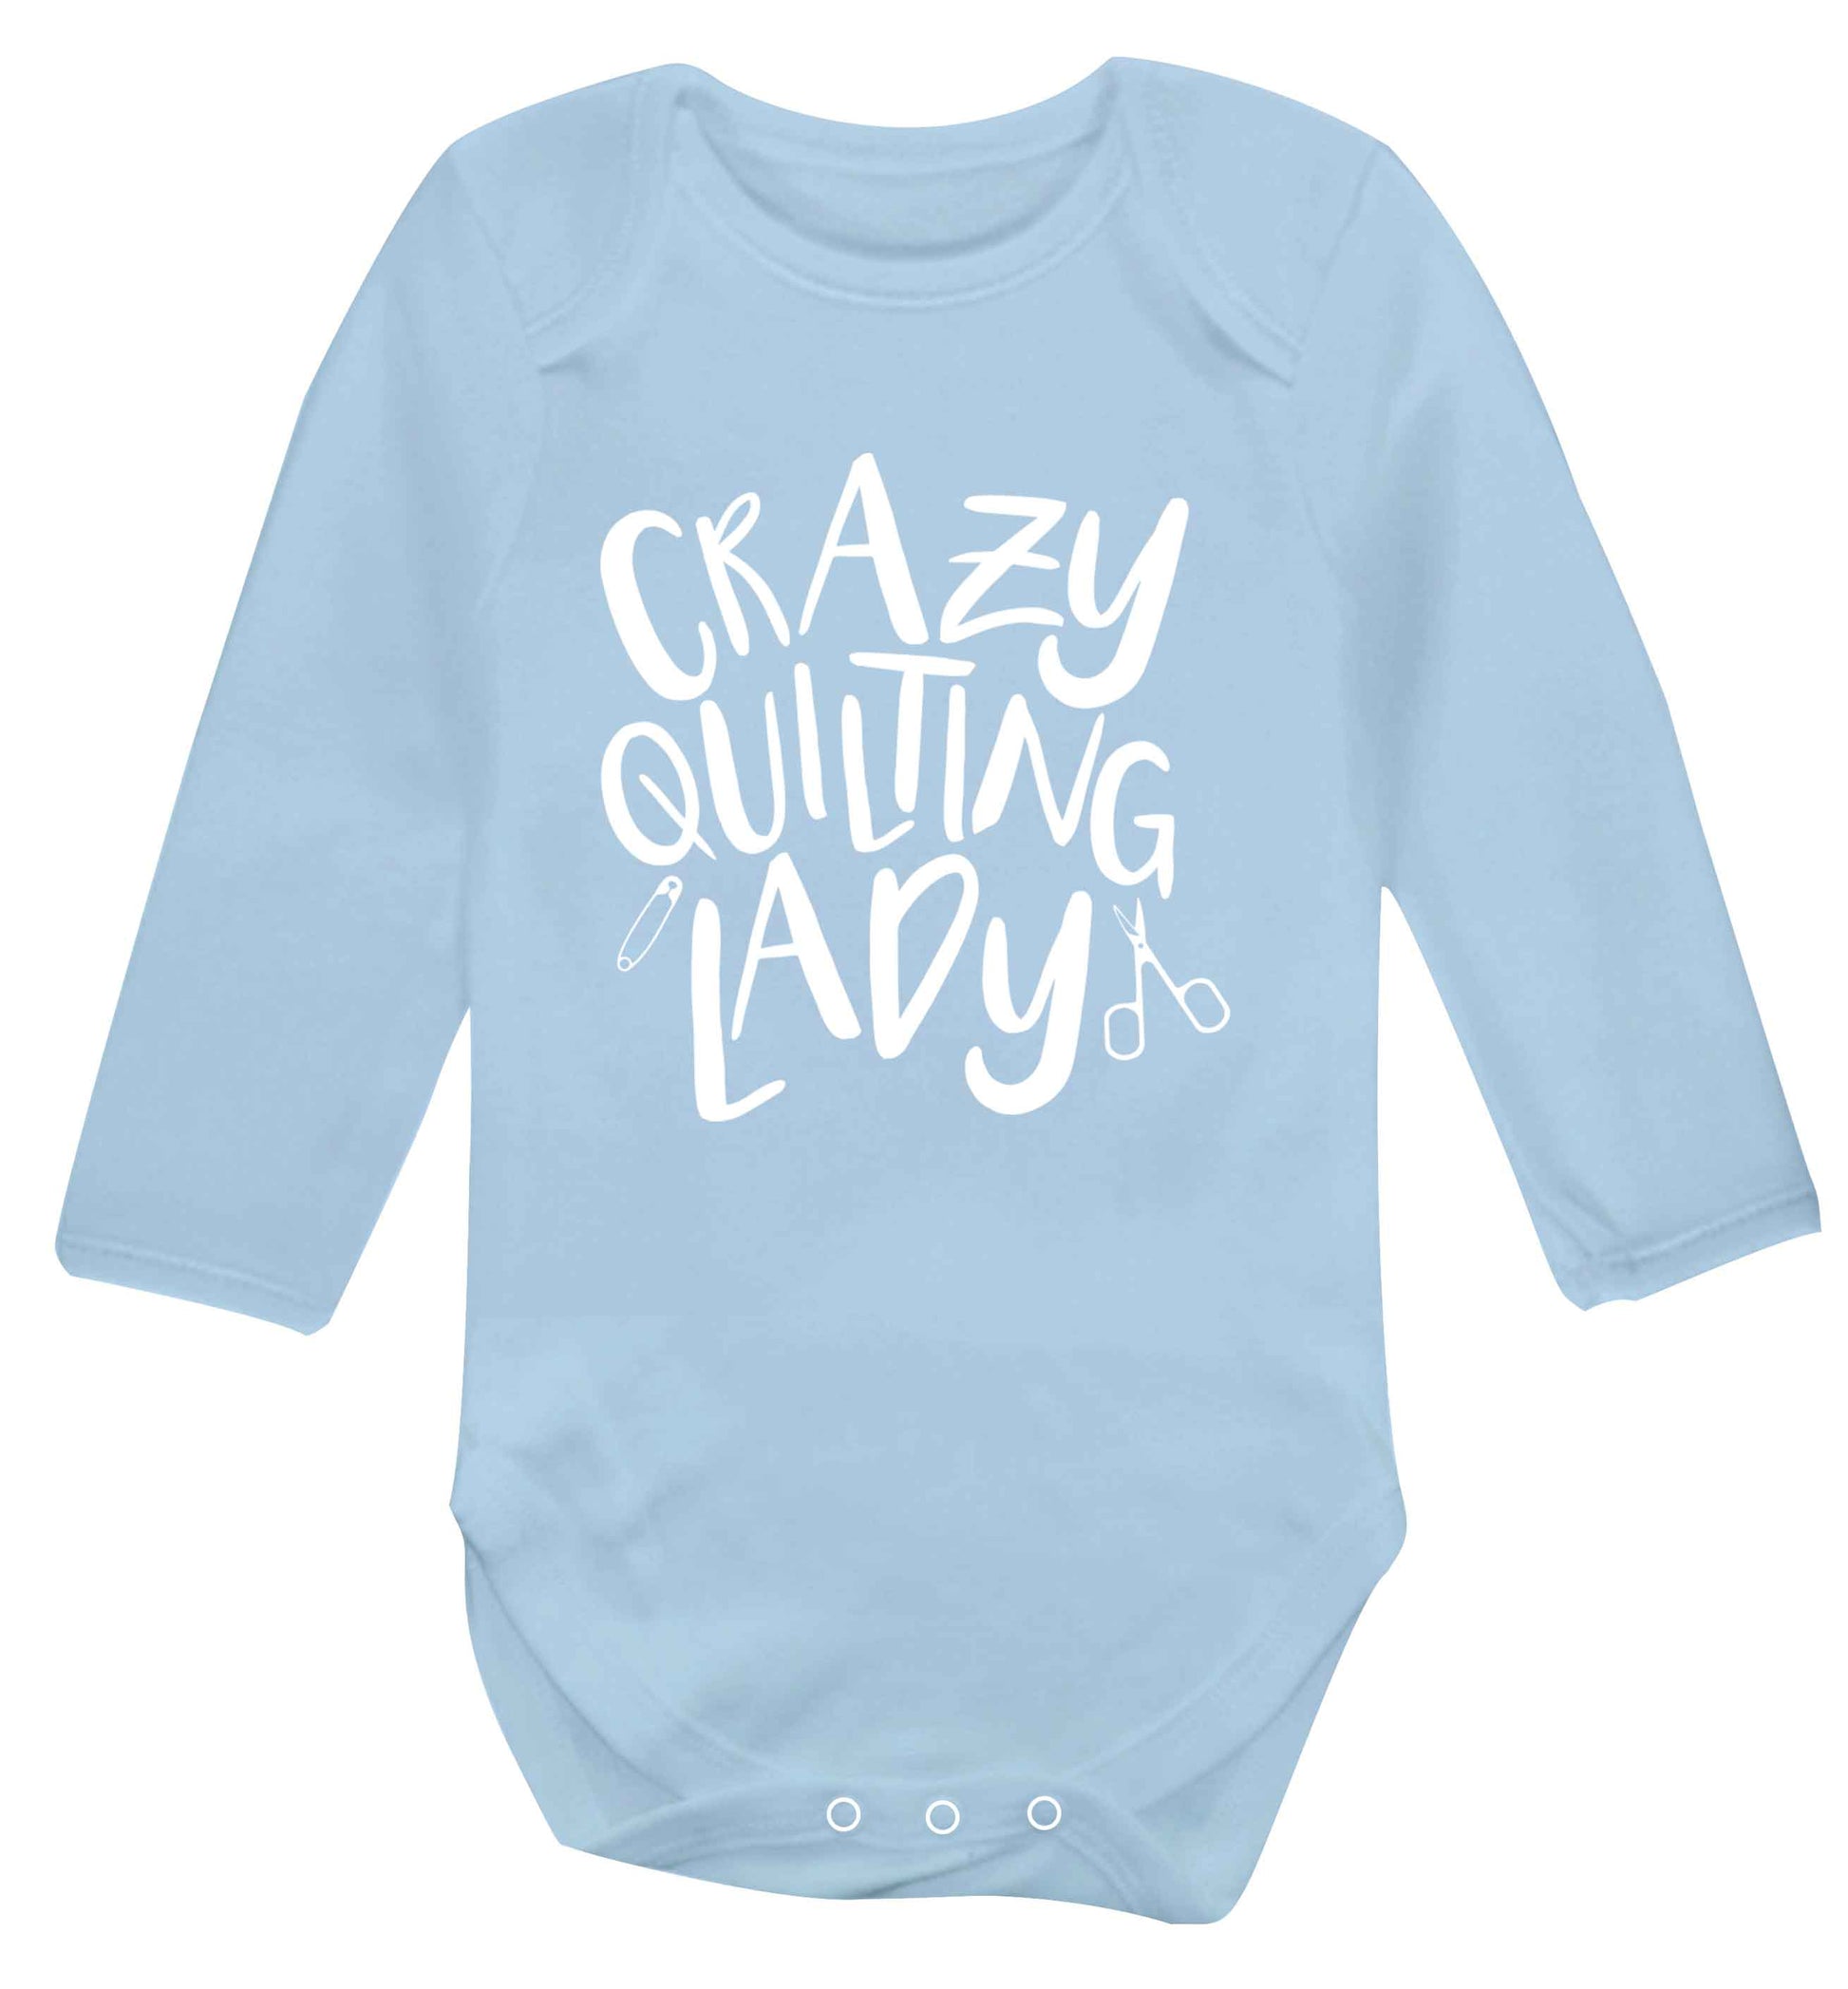 Crazy quilting lady Baby Vest long sleeved pale blue 6-12 months